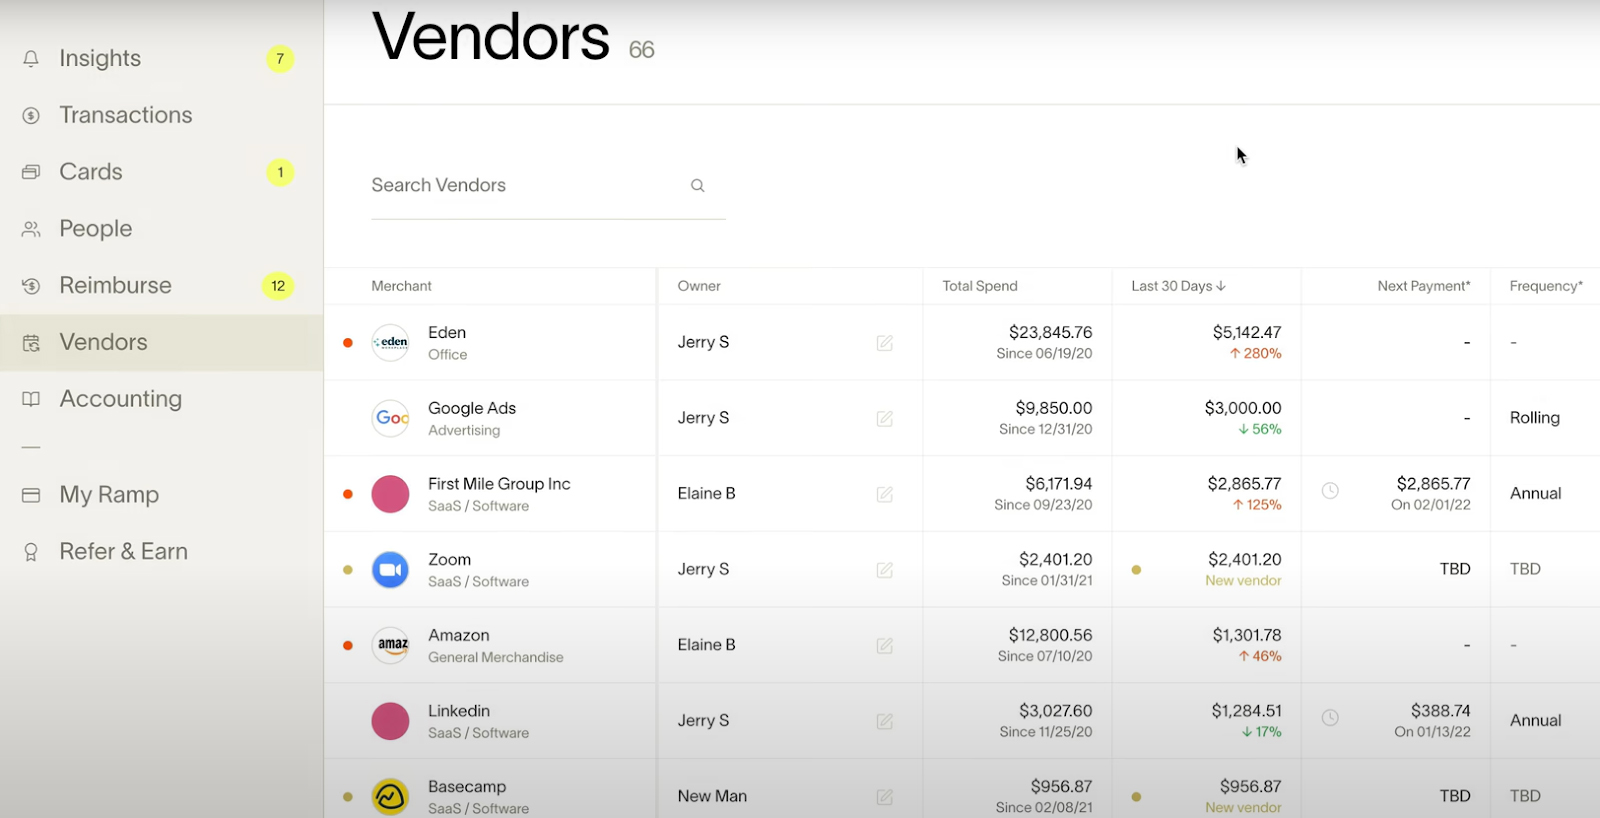 Ramp's Vendors dashboard shows categories by merchant, such as Owner, Total Spend, and Frequency.